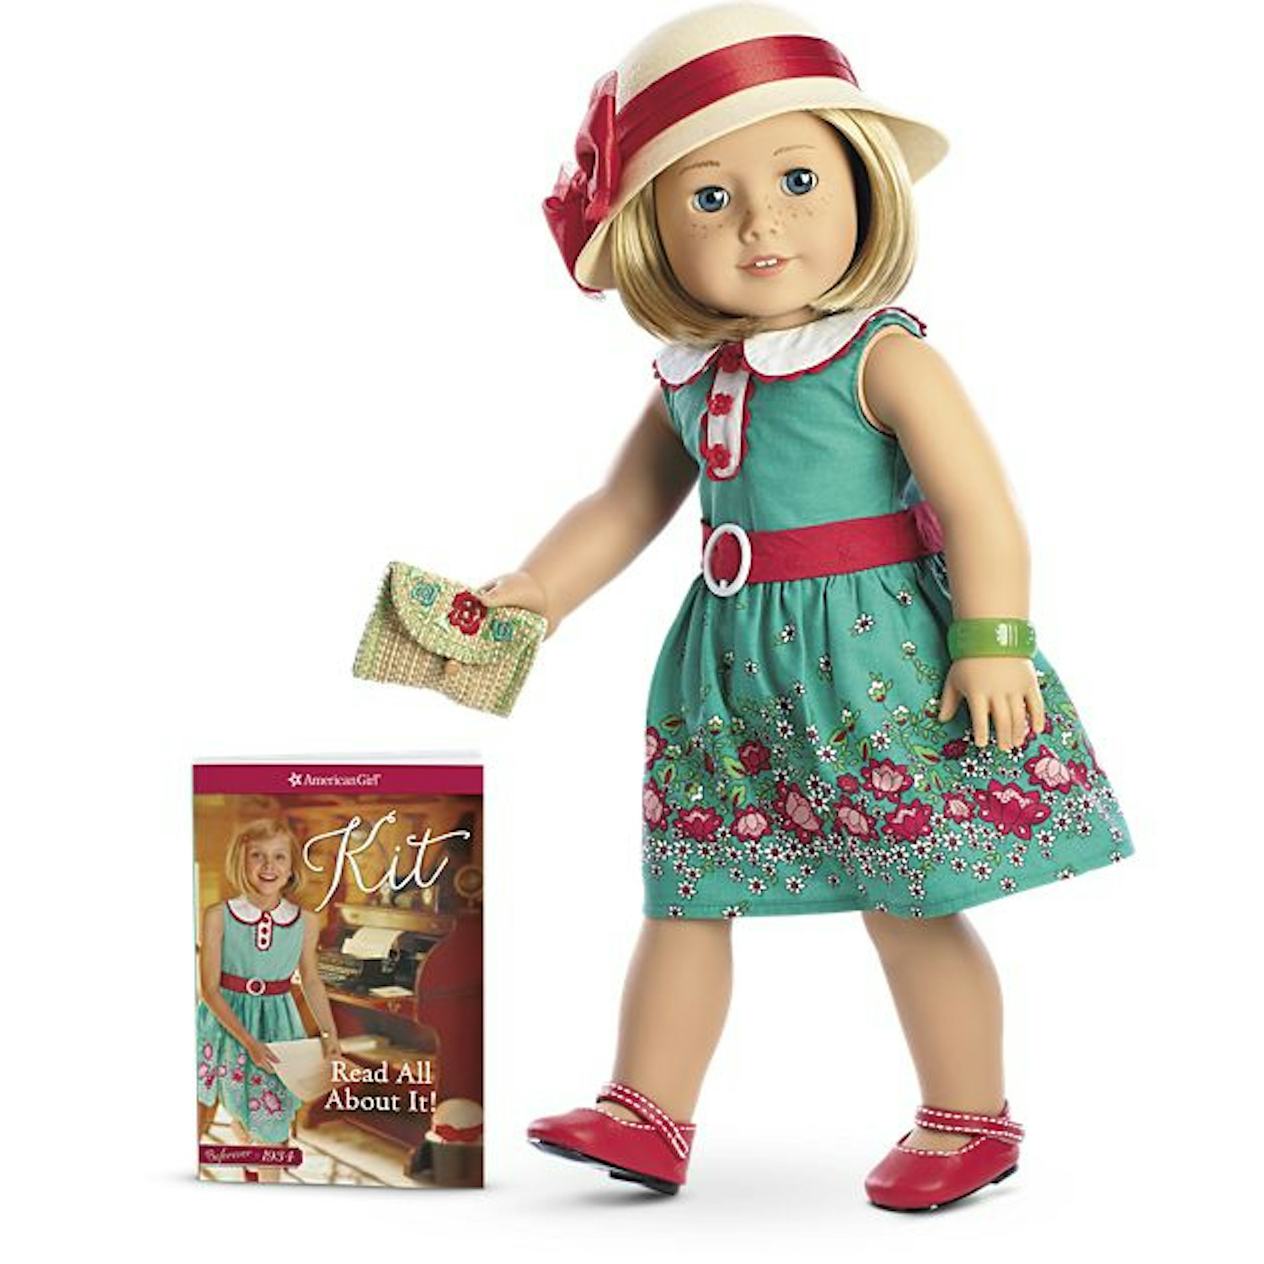 The One Book You Need To Read Based On Your Favorite American Girl Doll